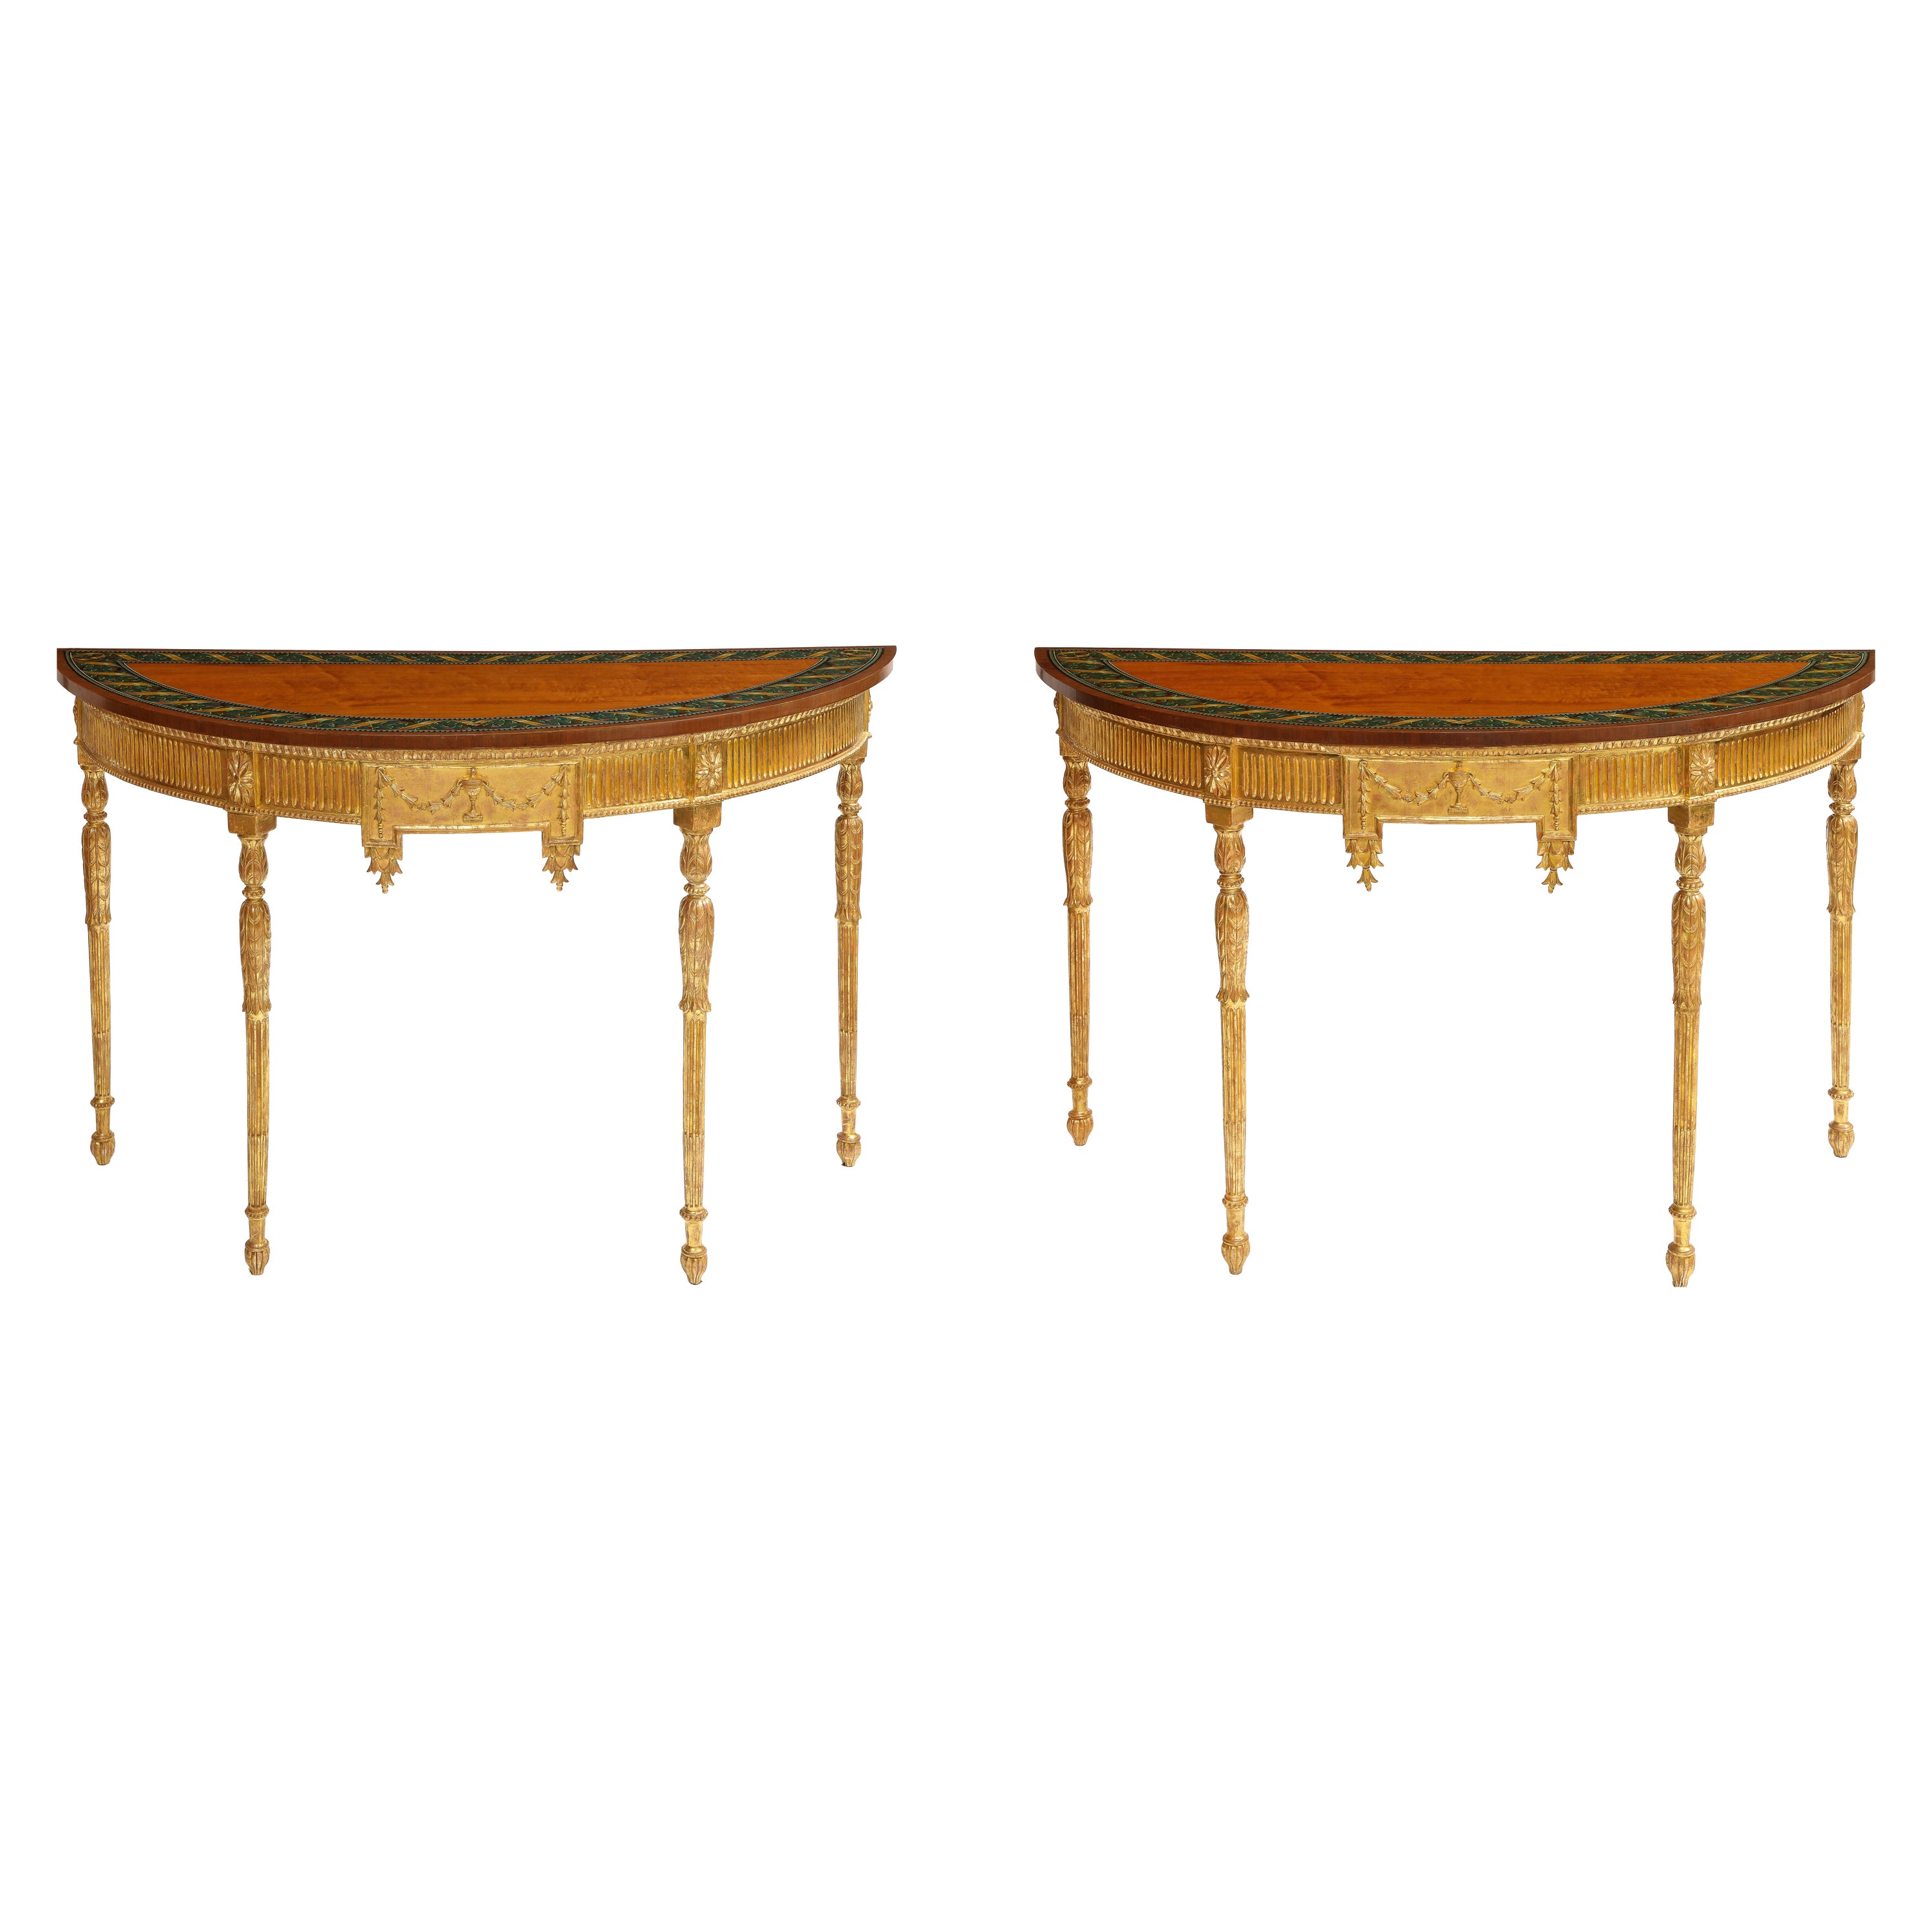 A Pair of 18th C. George III Gilt-Wood Demi-lune Consoles tables w/ Painted Tops